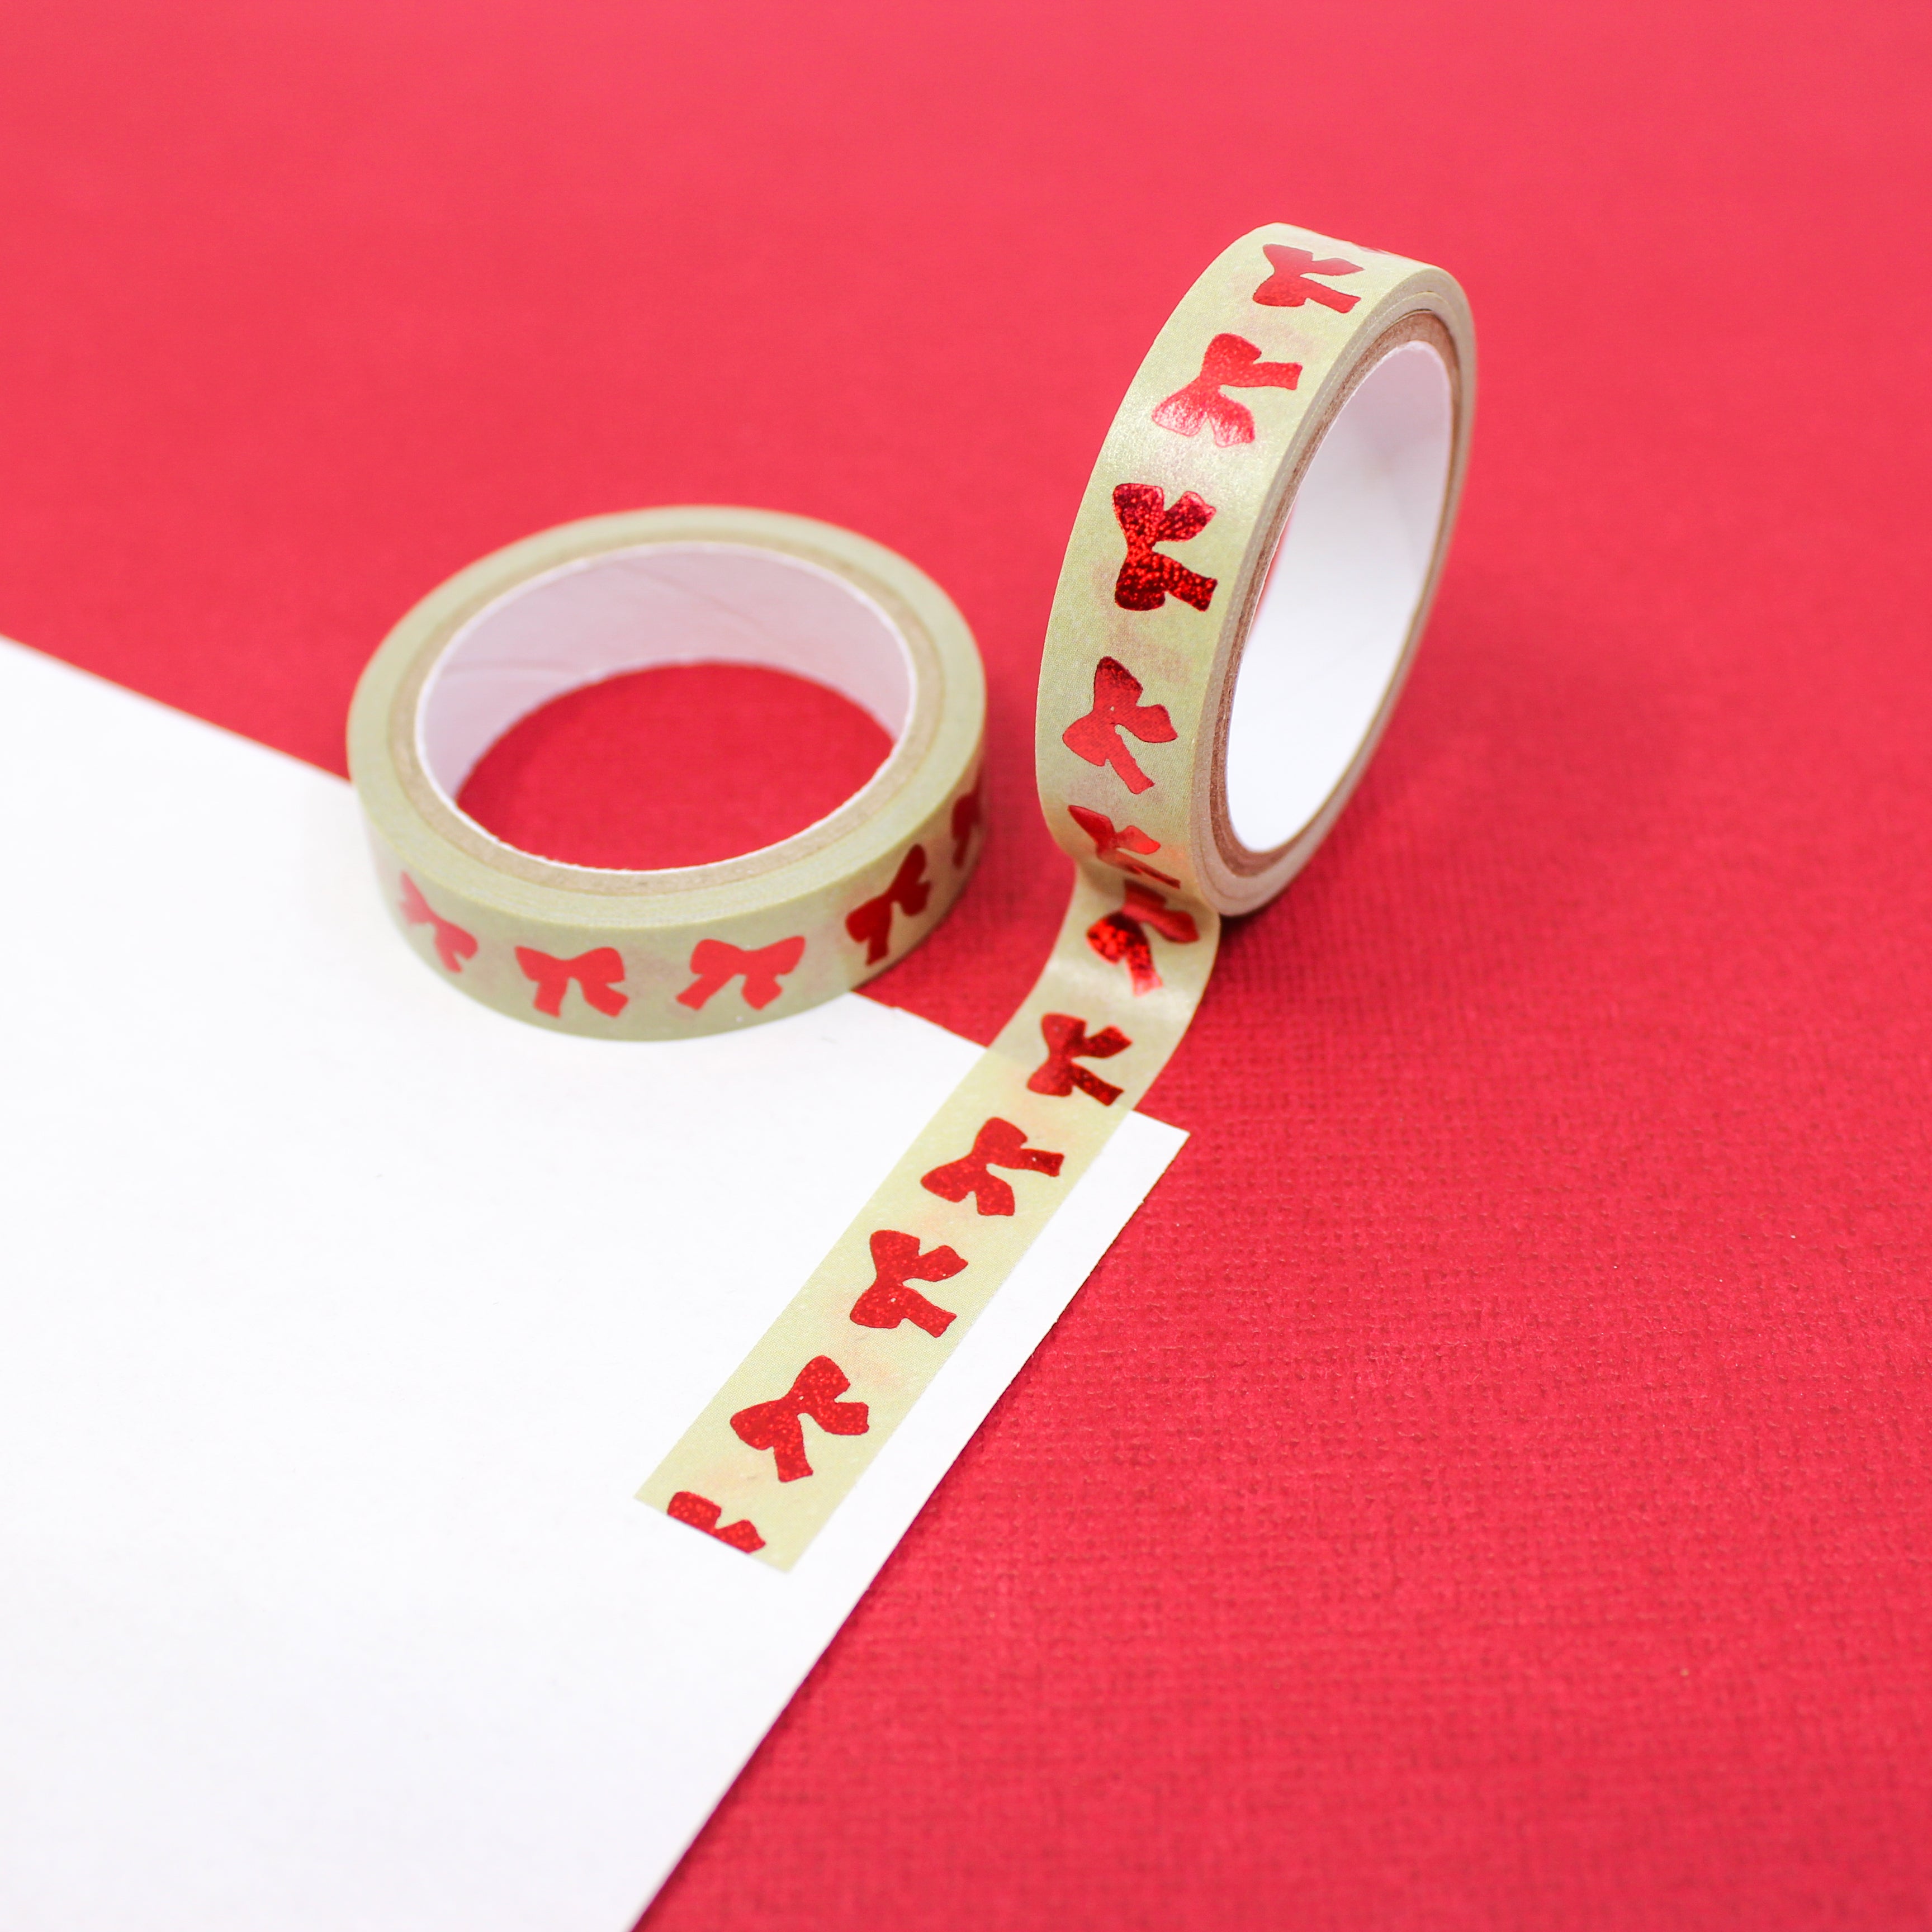 Infuse your creations with the magic of the holiday season using our washi tape adorned with classic red bow patterns, evoking the joy and festivity of holiday decorations. This tape is sold at BBB Supplies Craft Shop.